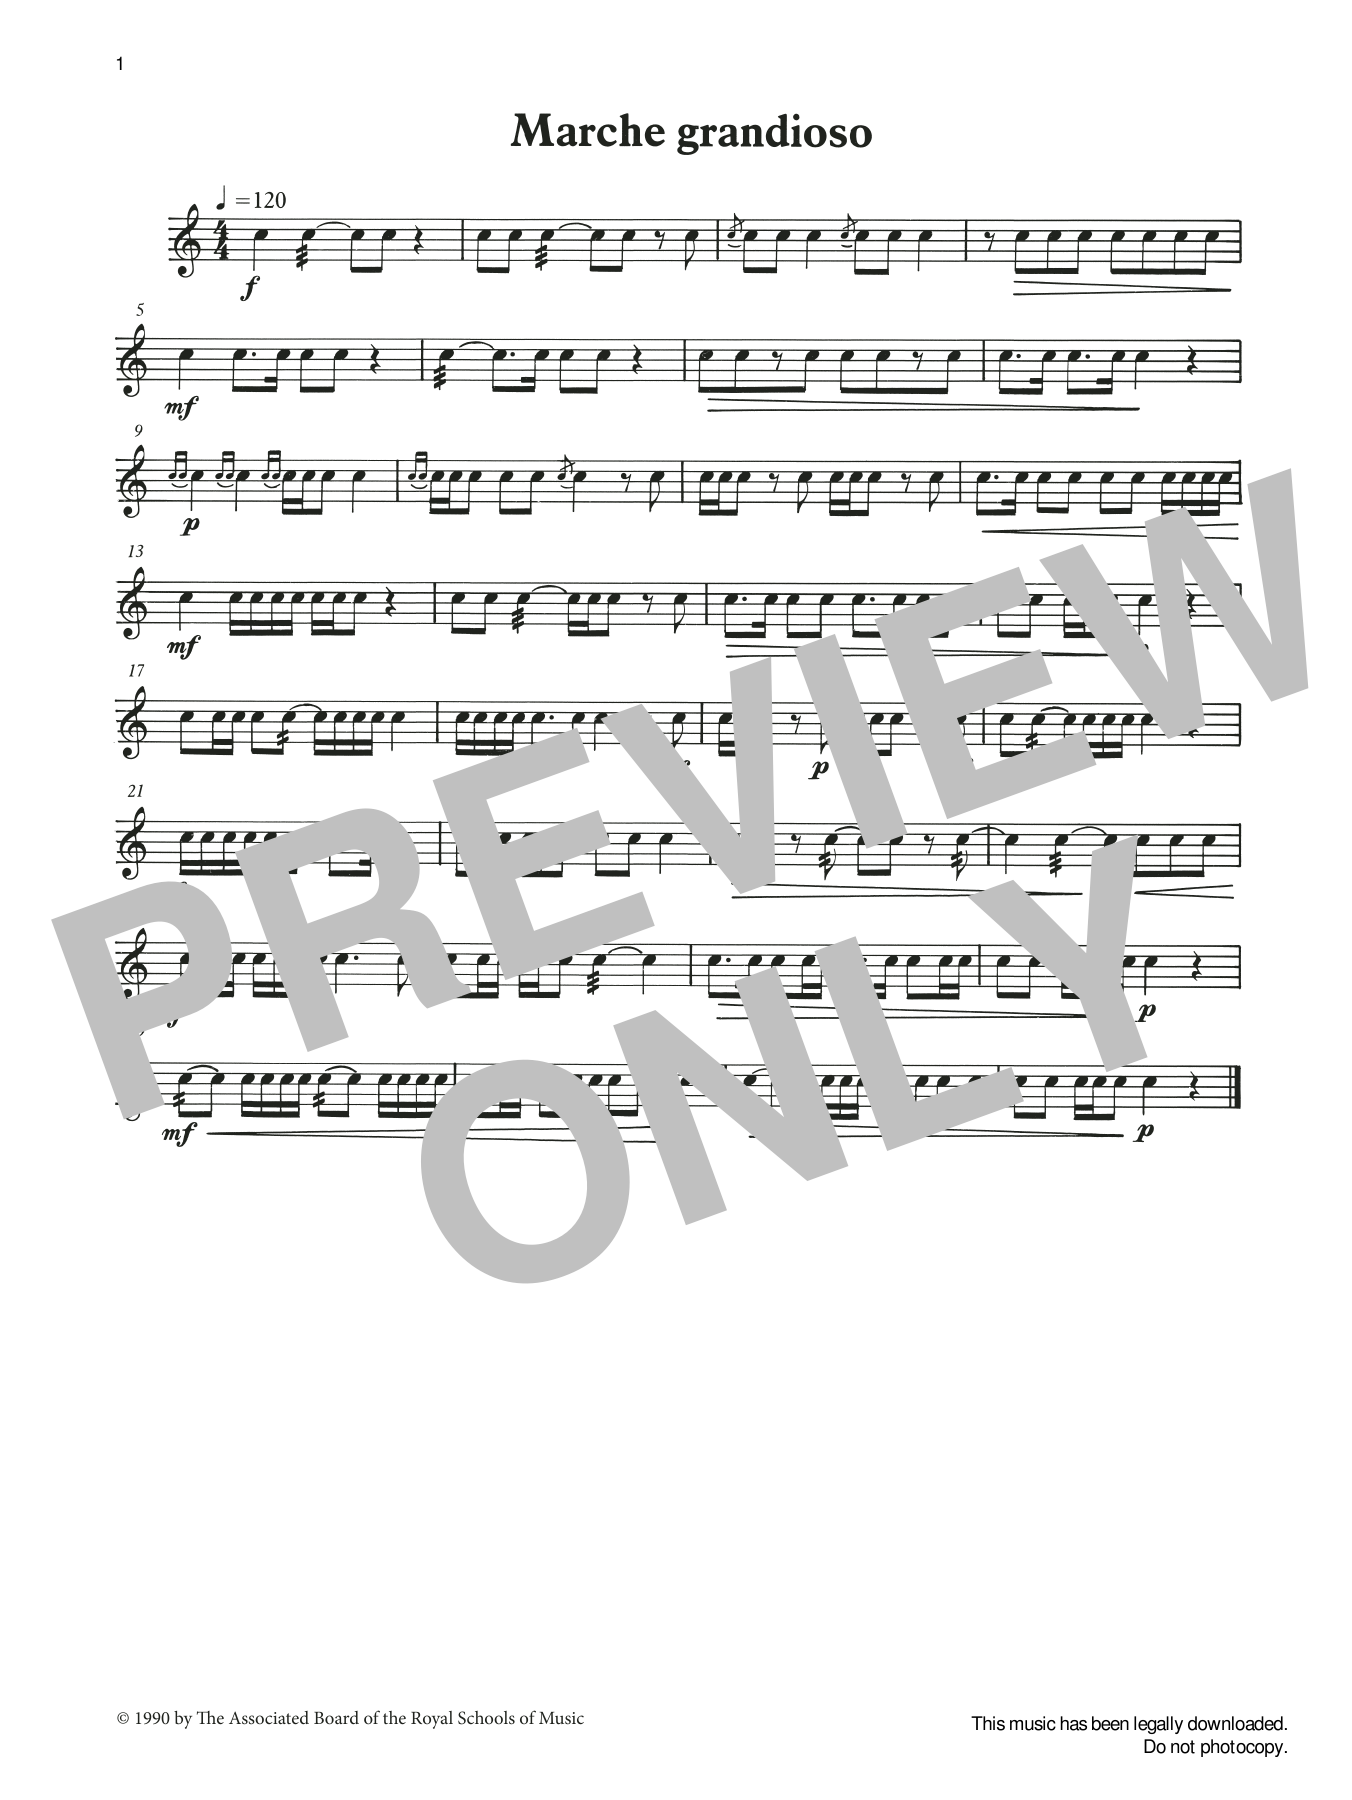 Download Ian Wright and Kevin Hathaway Marche grandioso from Graded Music for Sheet Music